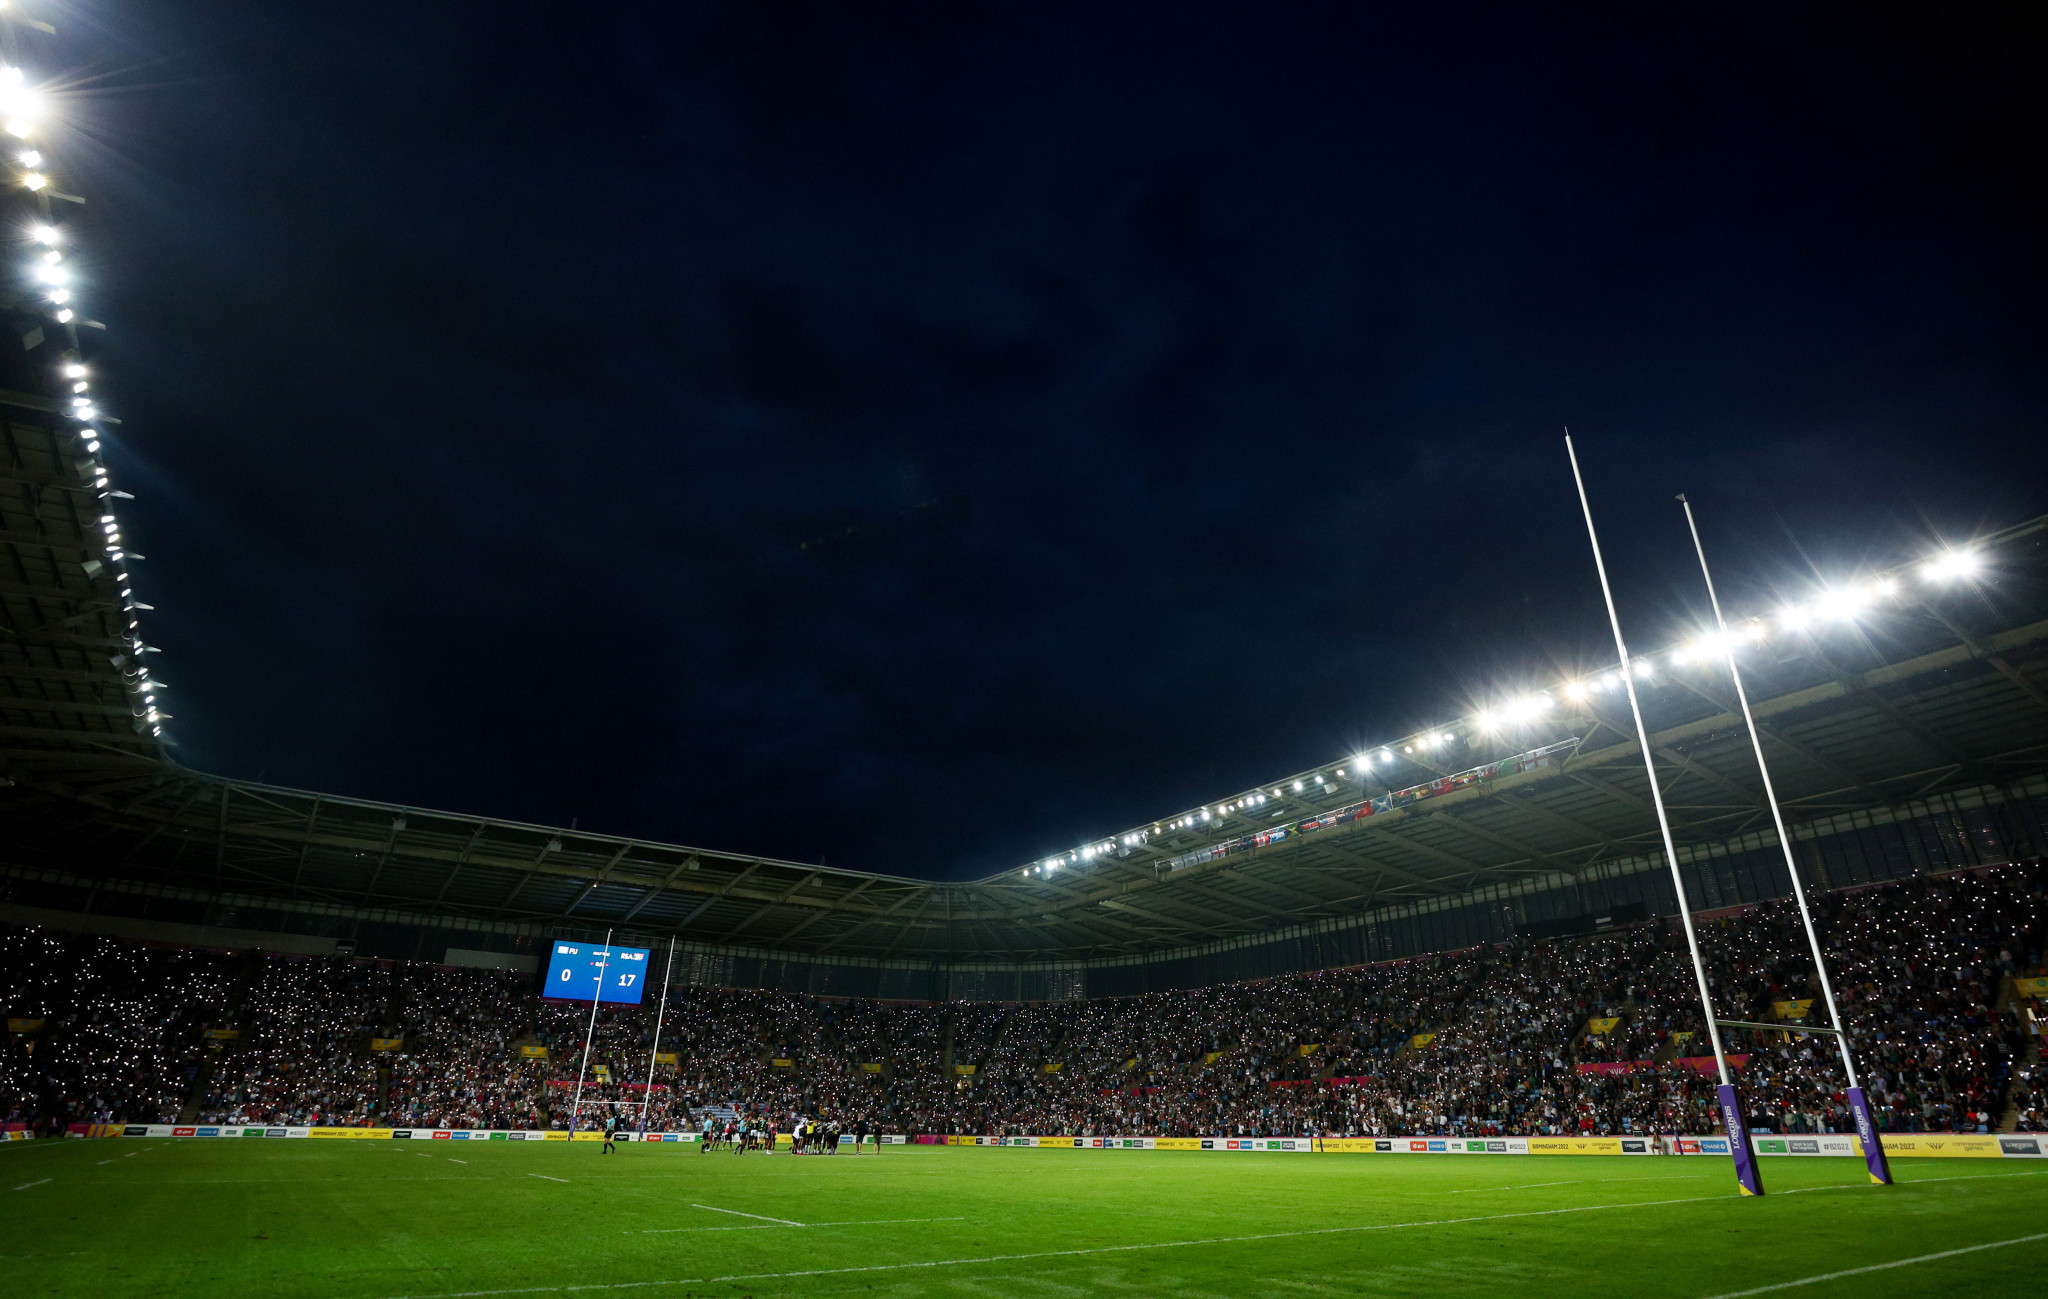 The Coventry Stadium held rugby sevens matches at Birmingham 2022 from July 29 to 31 ©Getty Images